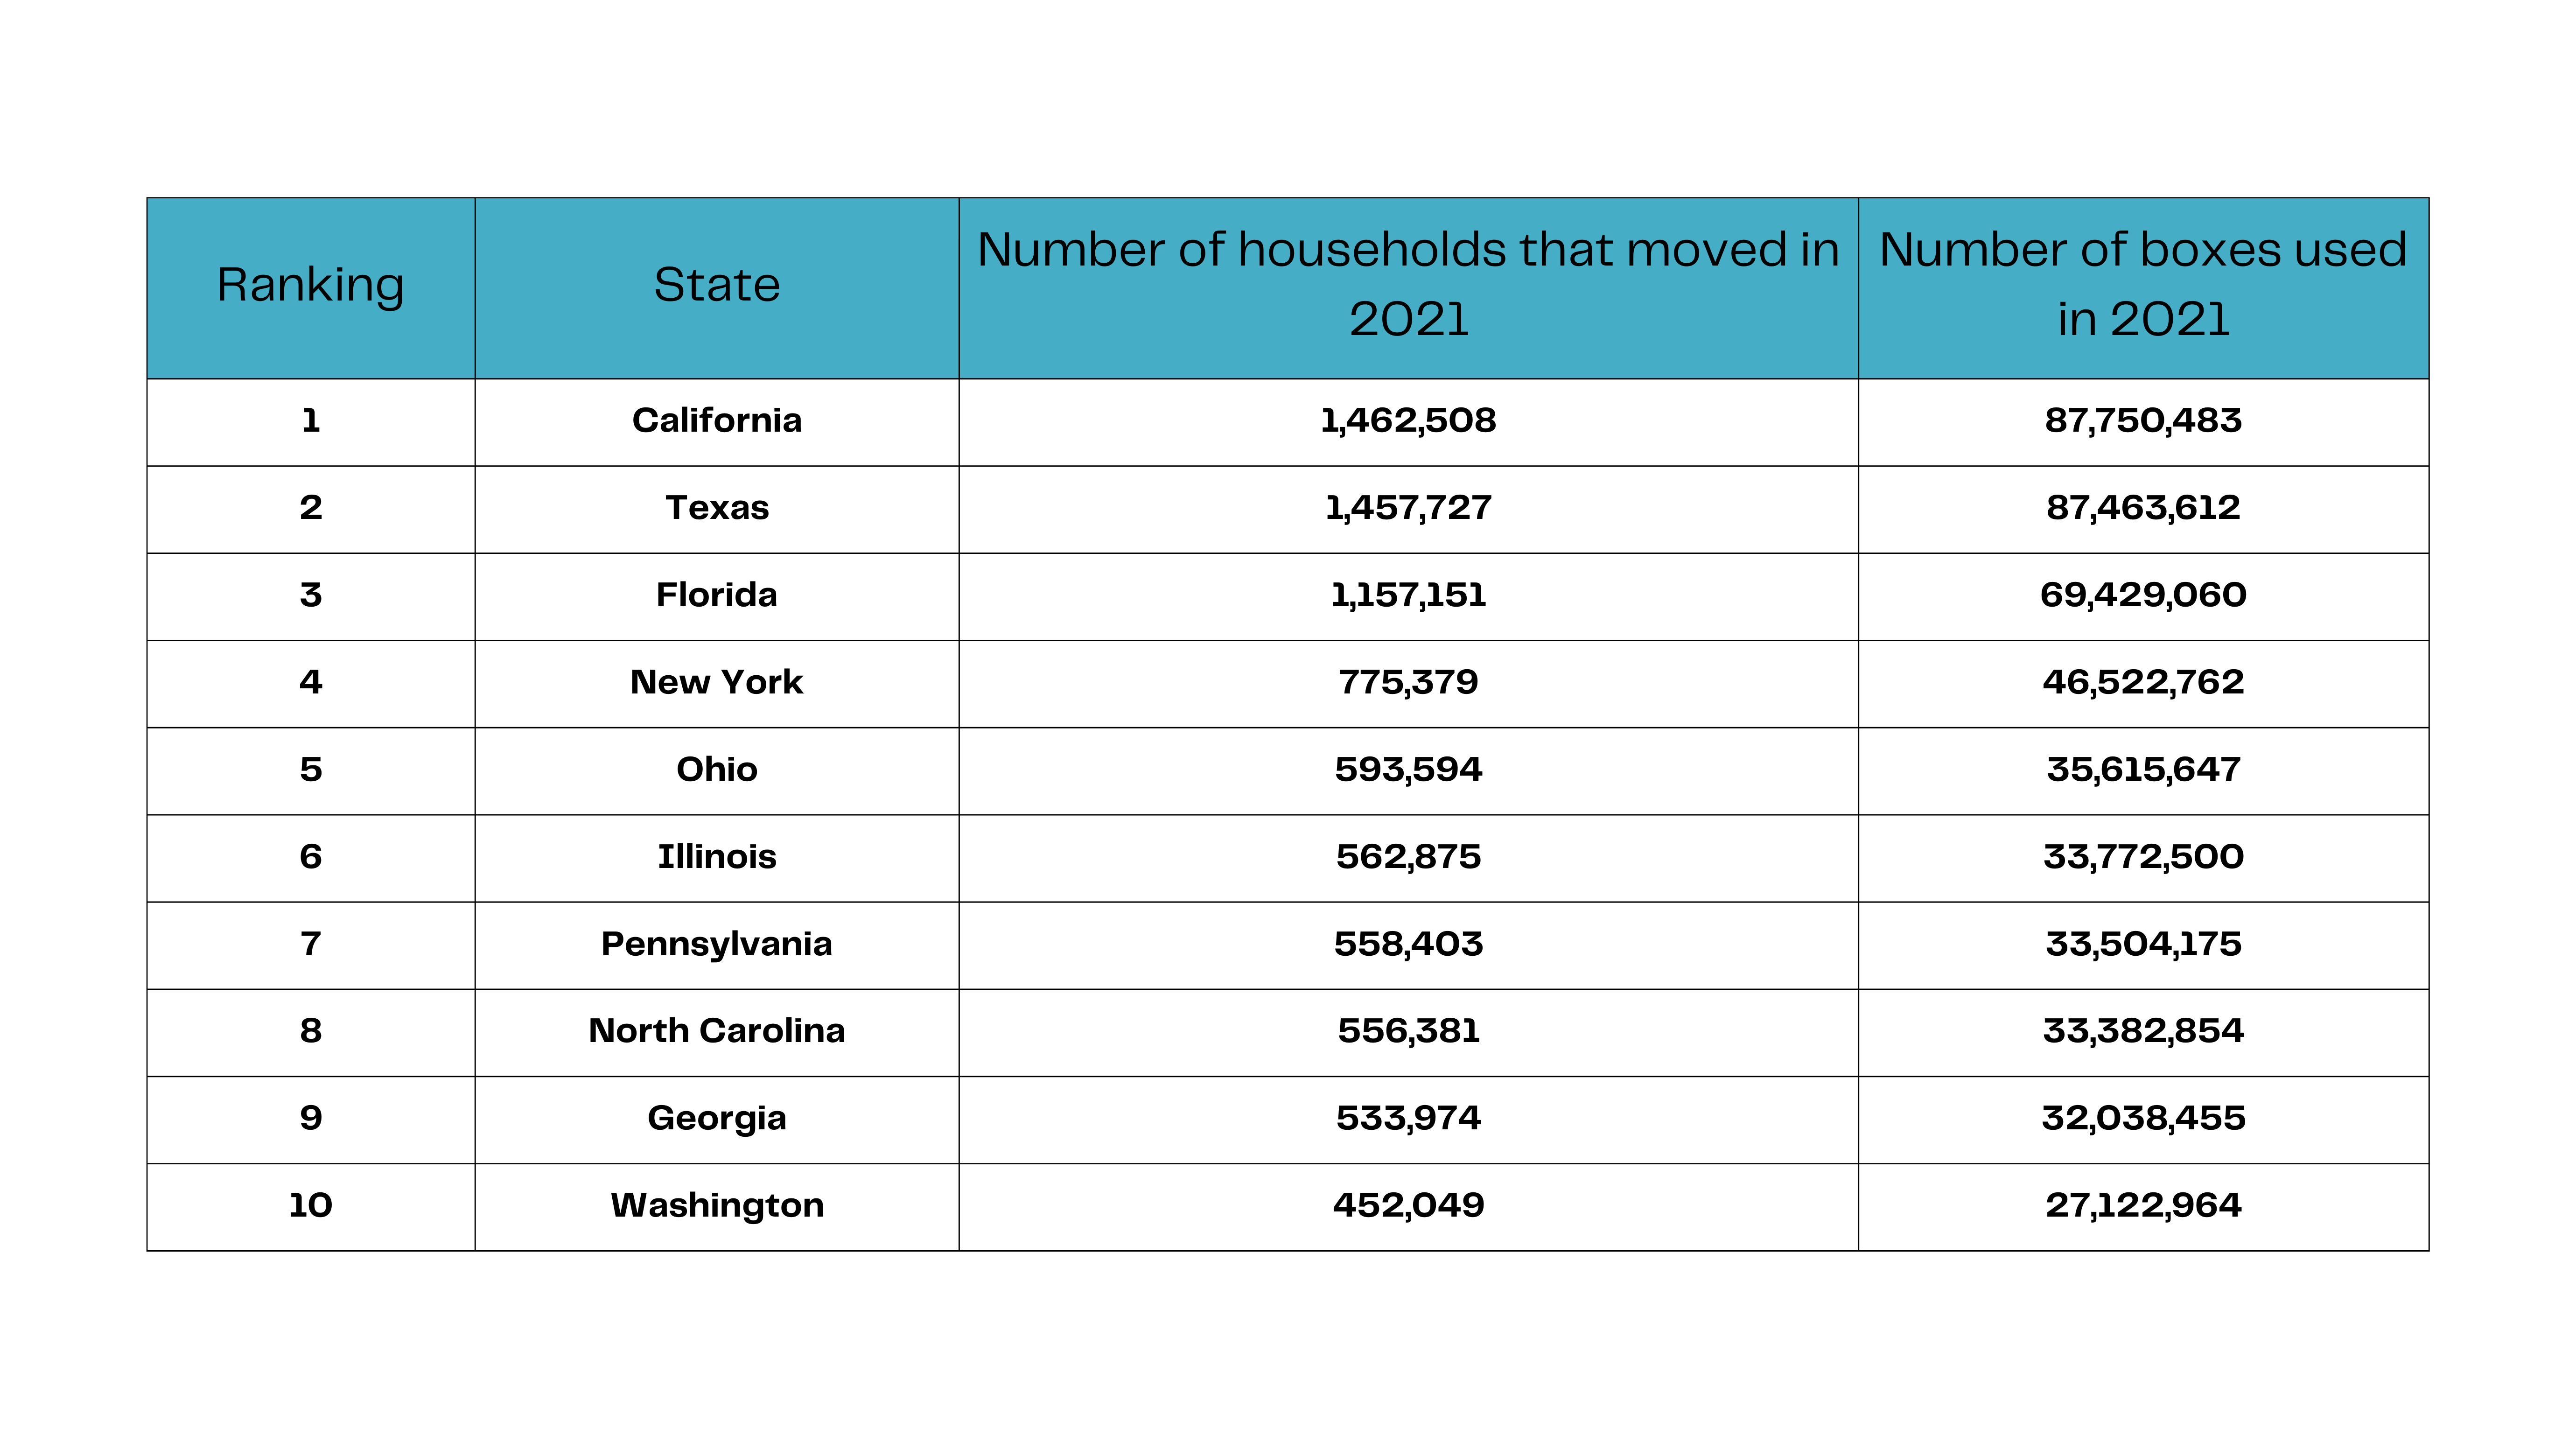 A table showing the top 10 American states that used the highest number of boxes to move households in 2021.